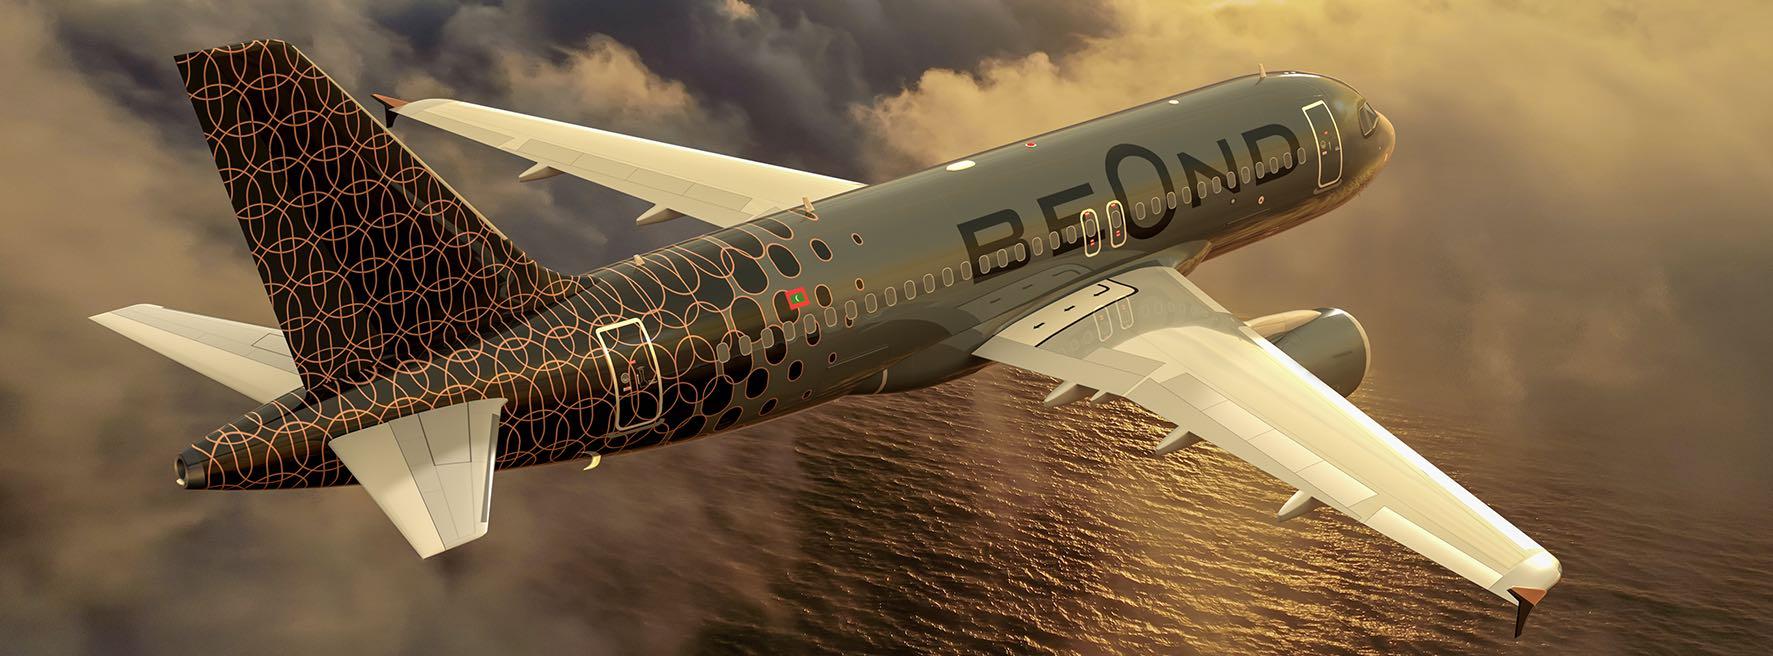 Beond launches luxury flights from Saudi Arabia to Maldives